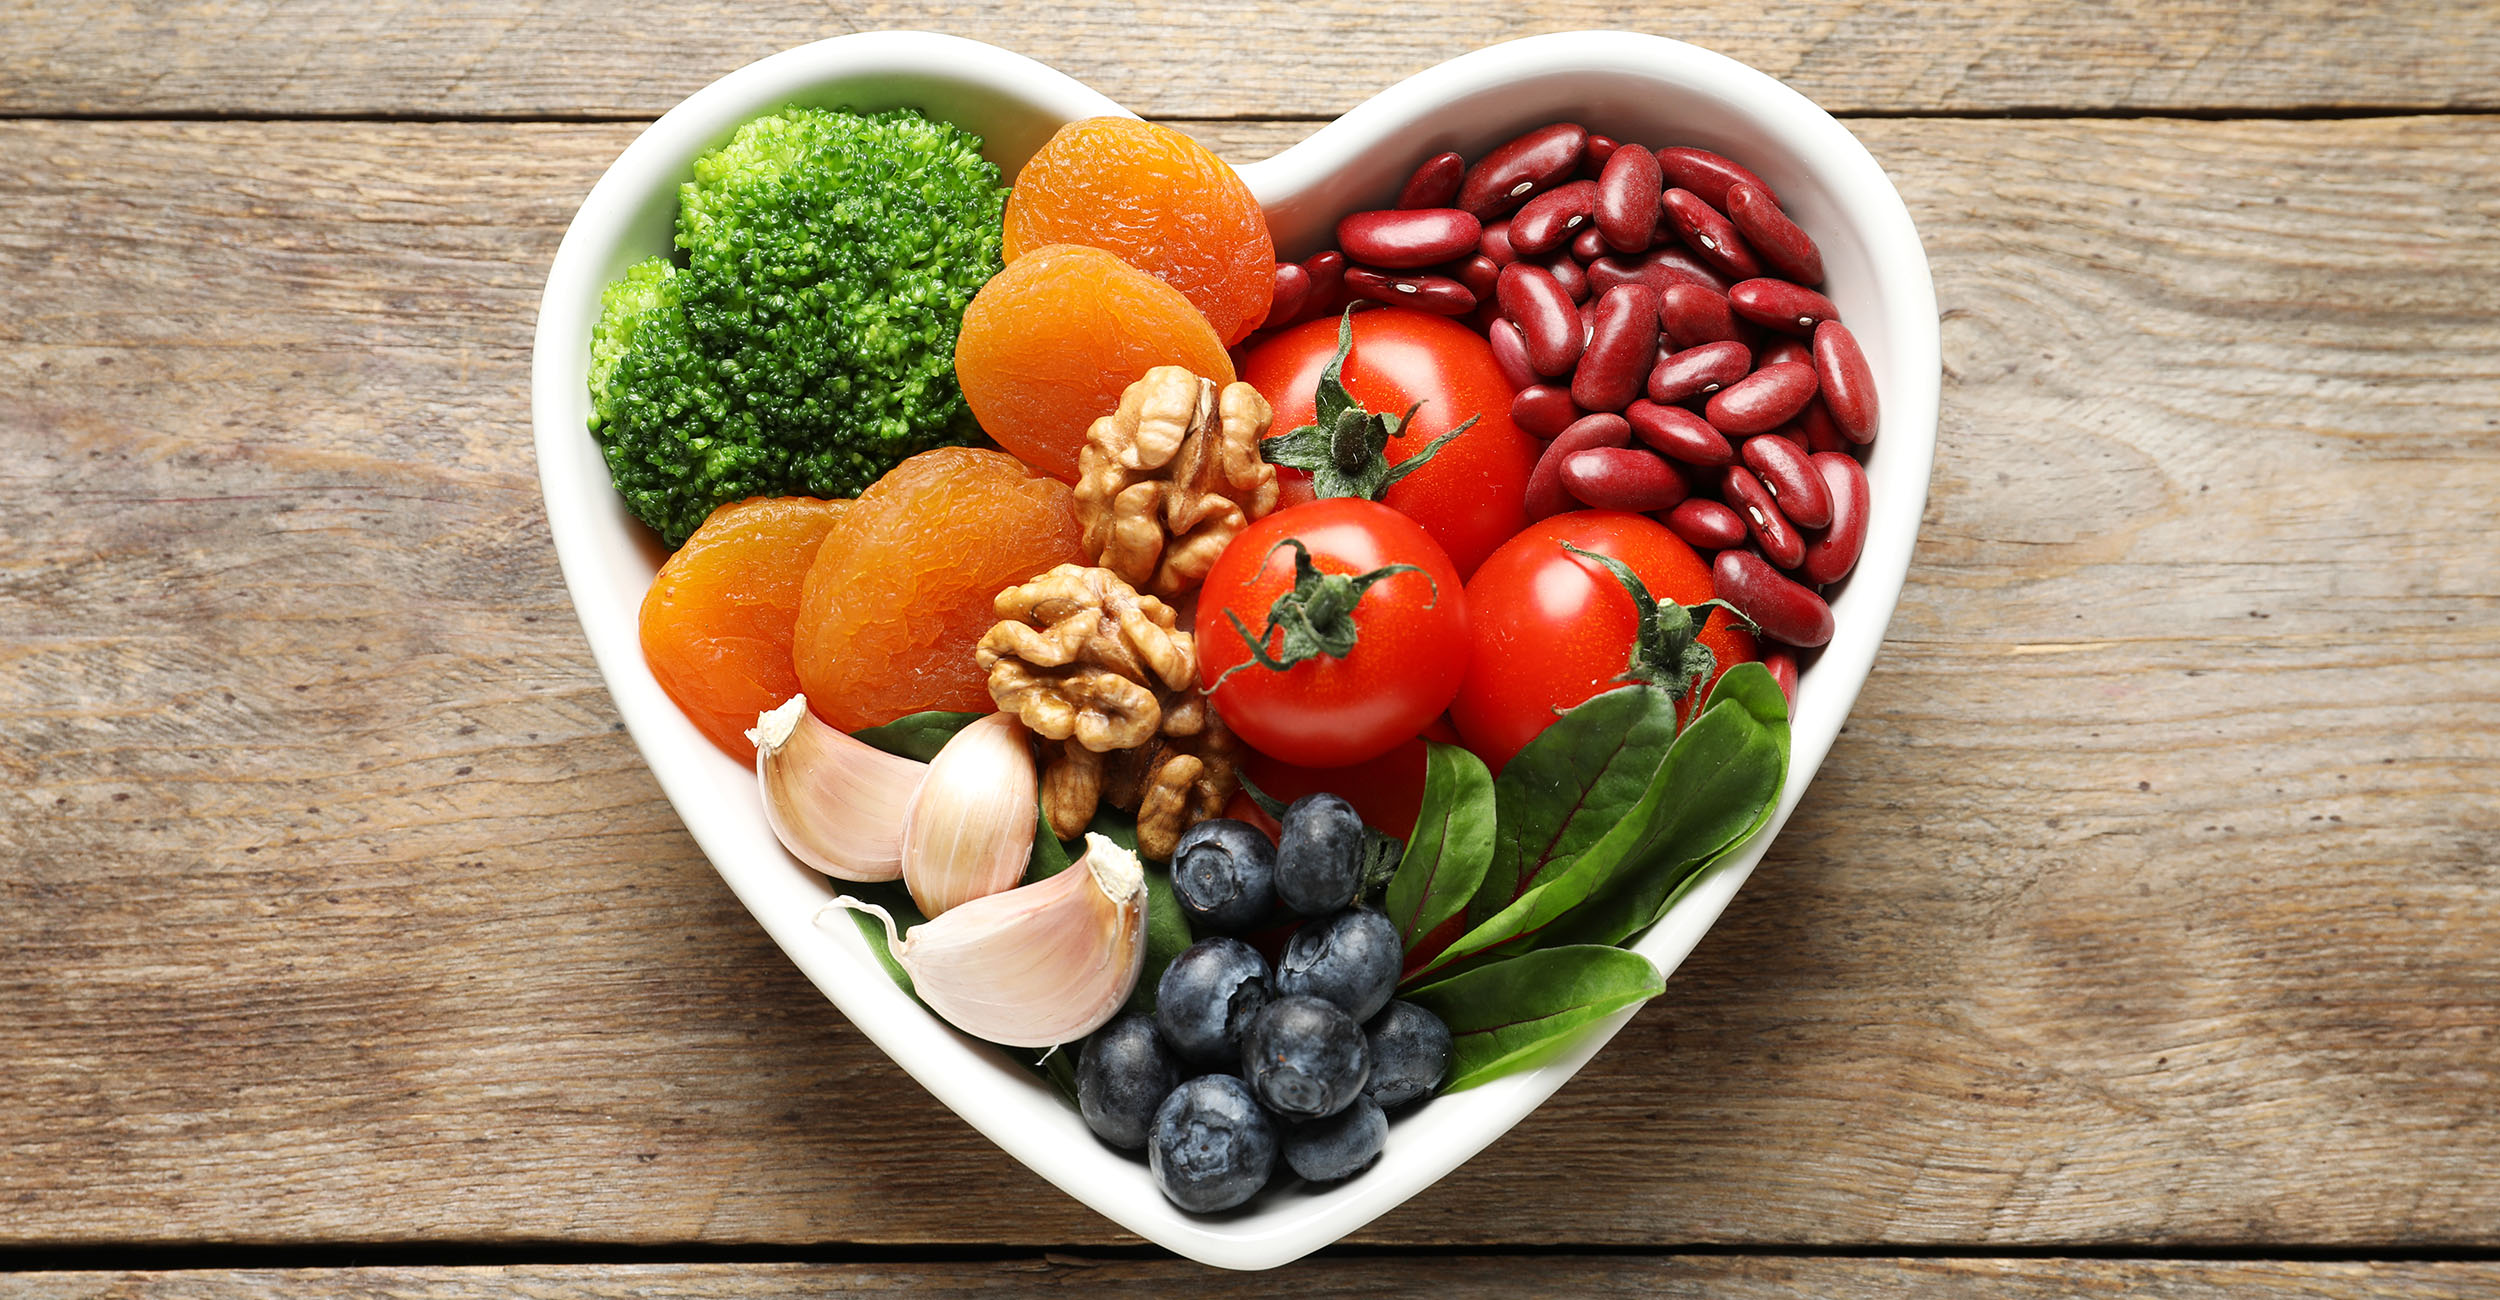 Heart-shaped bowl filled with healthy foods.